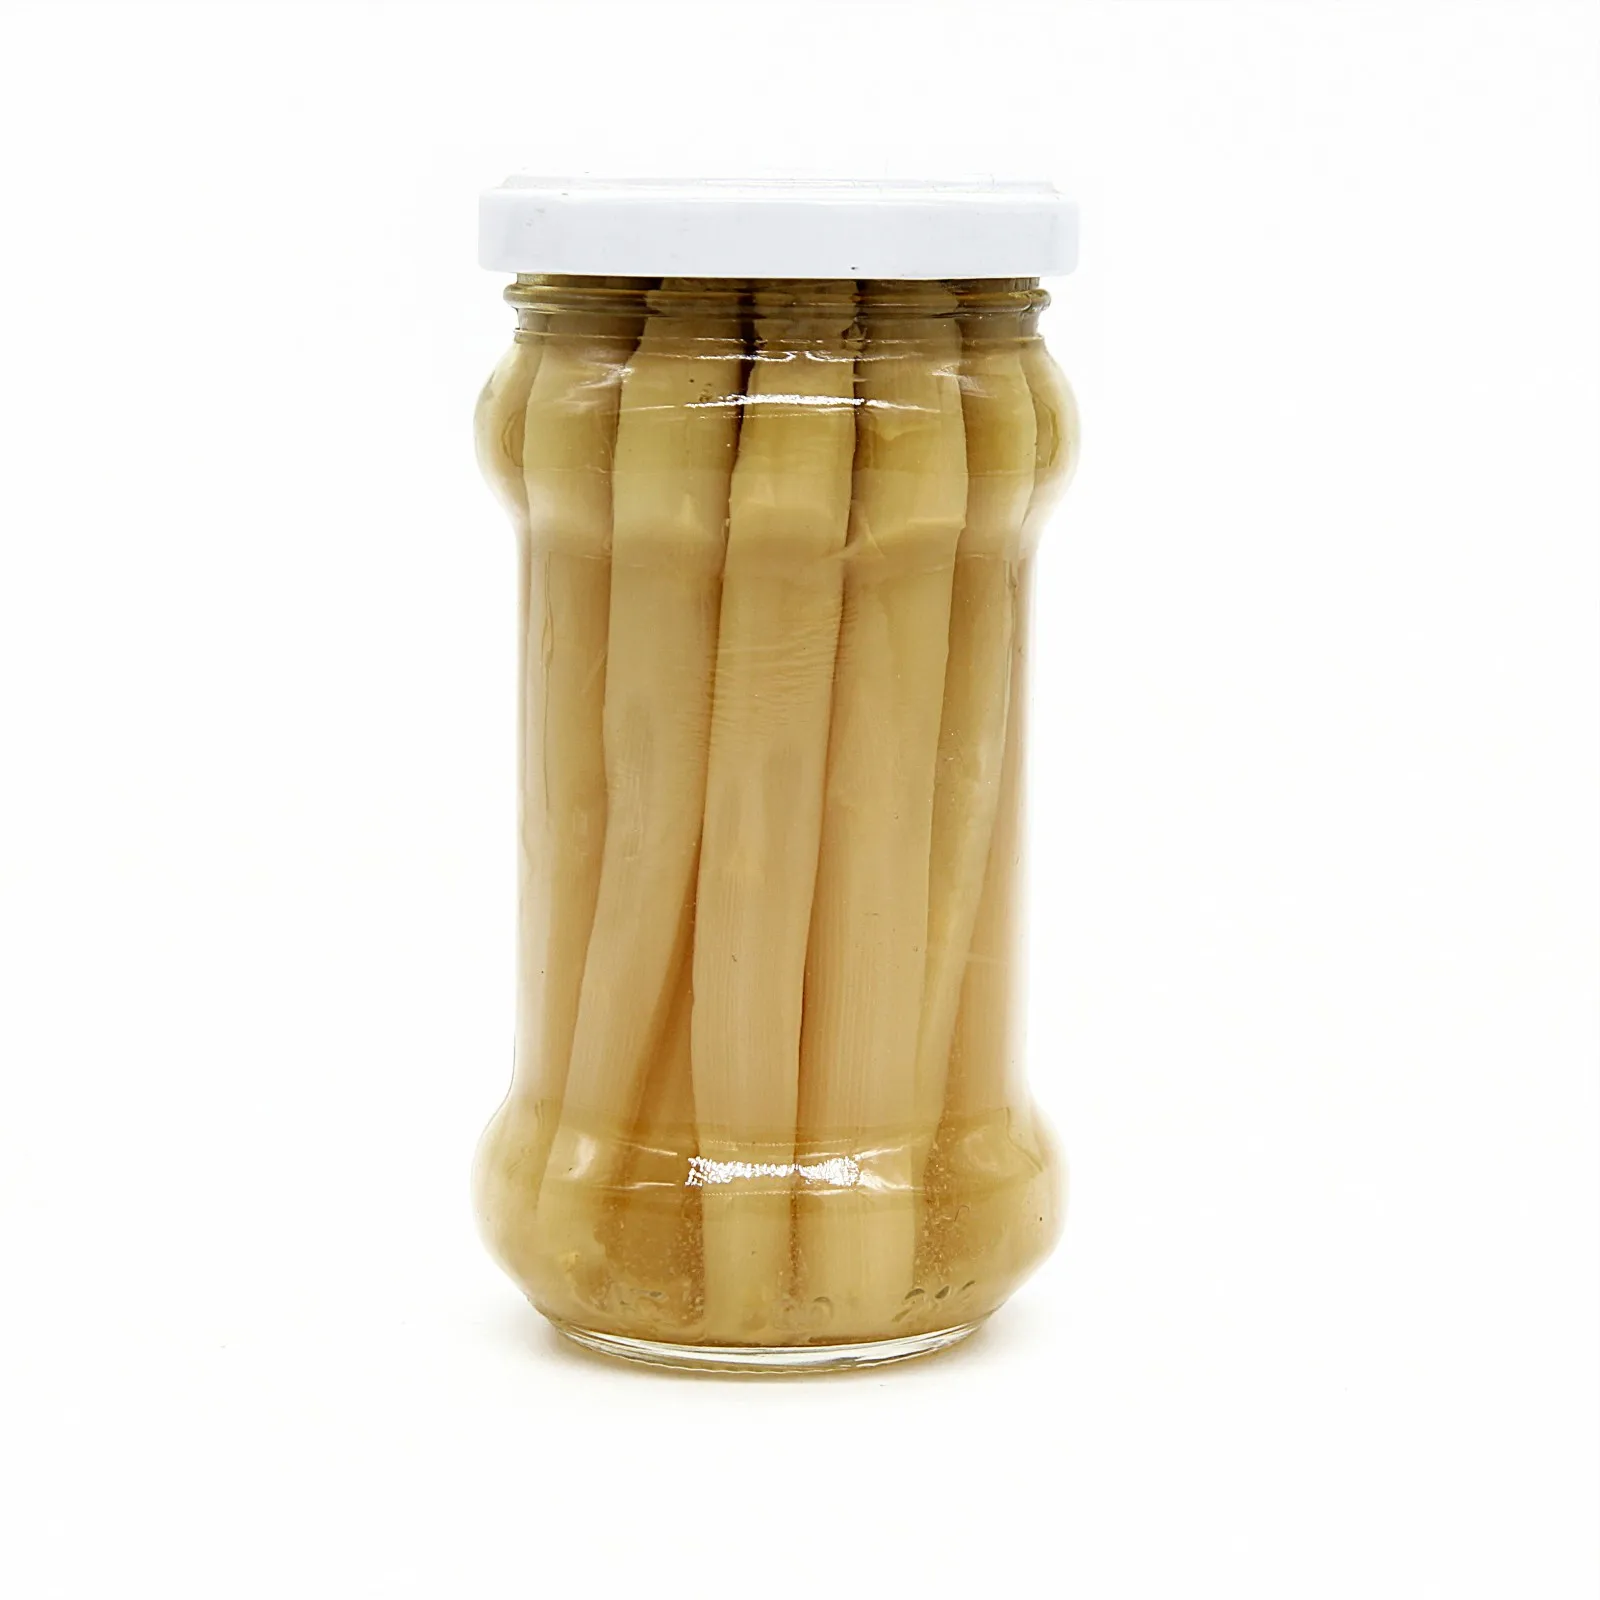 Canned Asparagus - Buy Asparagus,Canned Asparagus,Chinese Canned